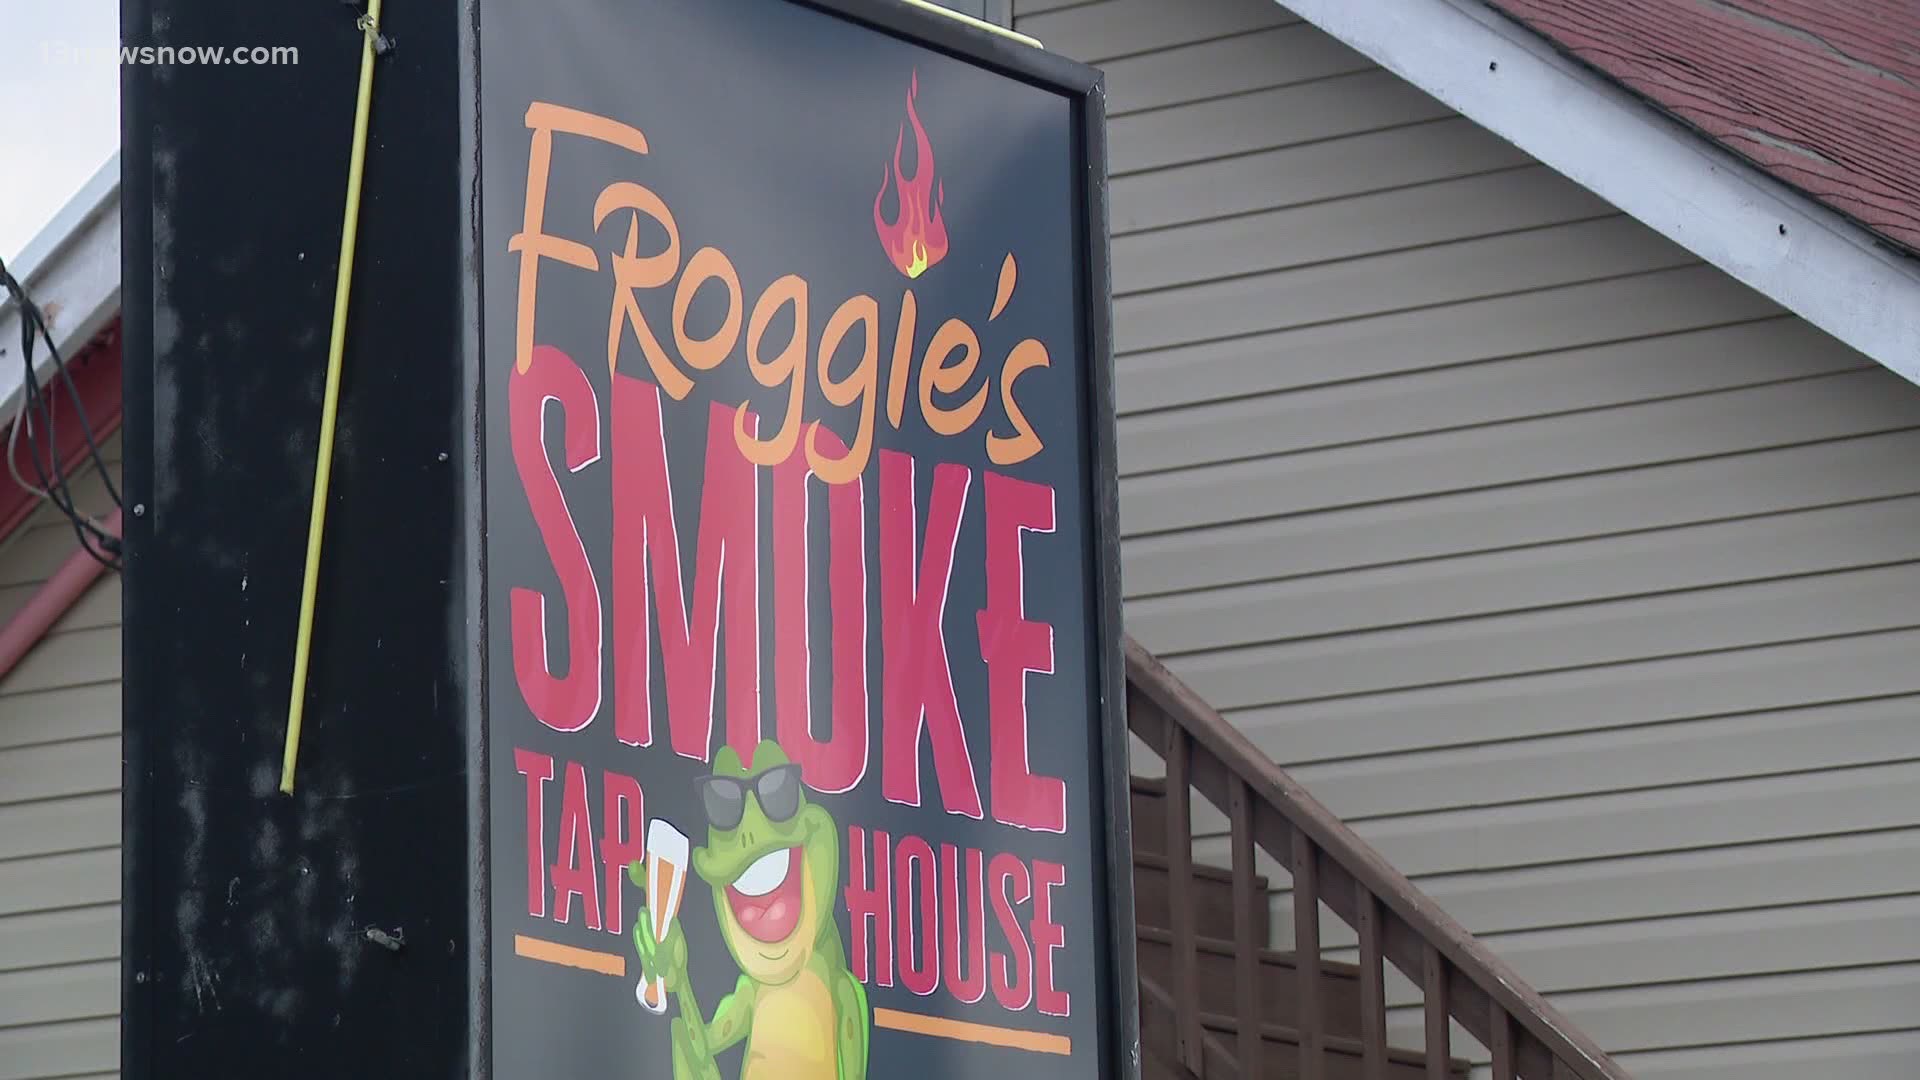 Froggie's Smoke House employees said they've asked for more crosswalks in the area before.